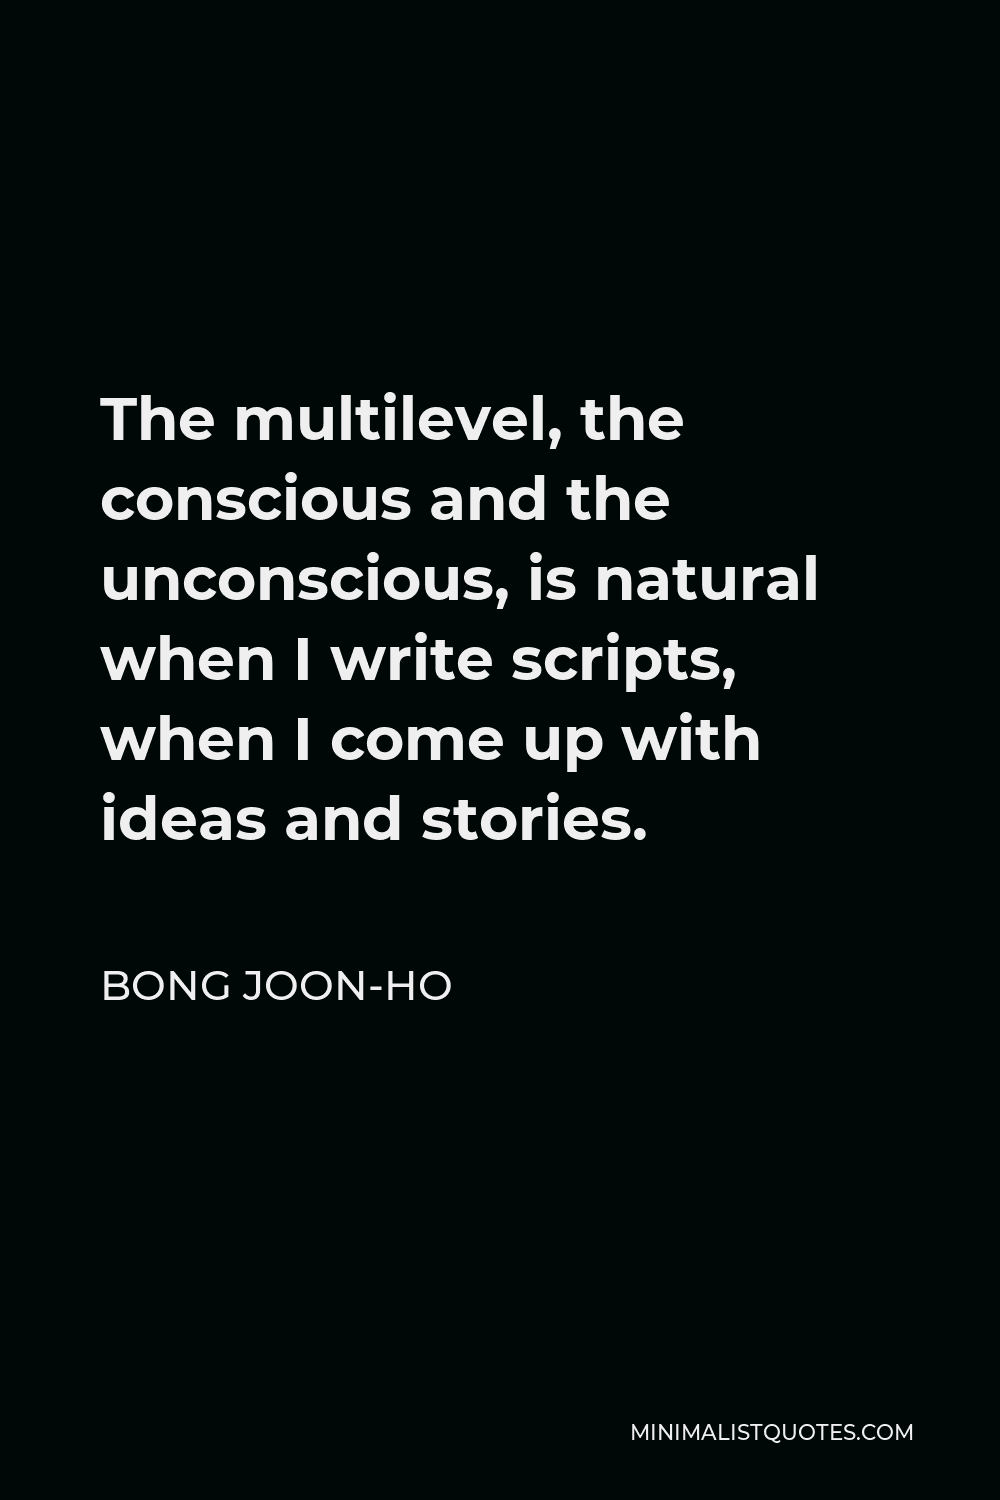 Bong Joon-ho Quote - The multilevel, the conscious and the unconscious, is natural when I write scripts, when I come up with ideas and stories.